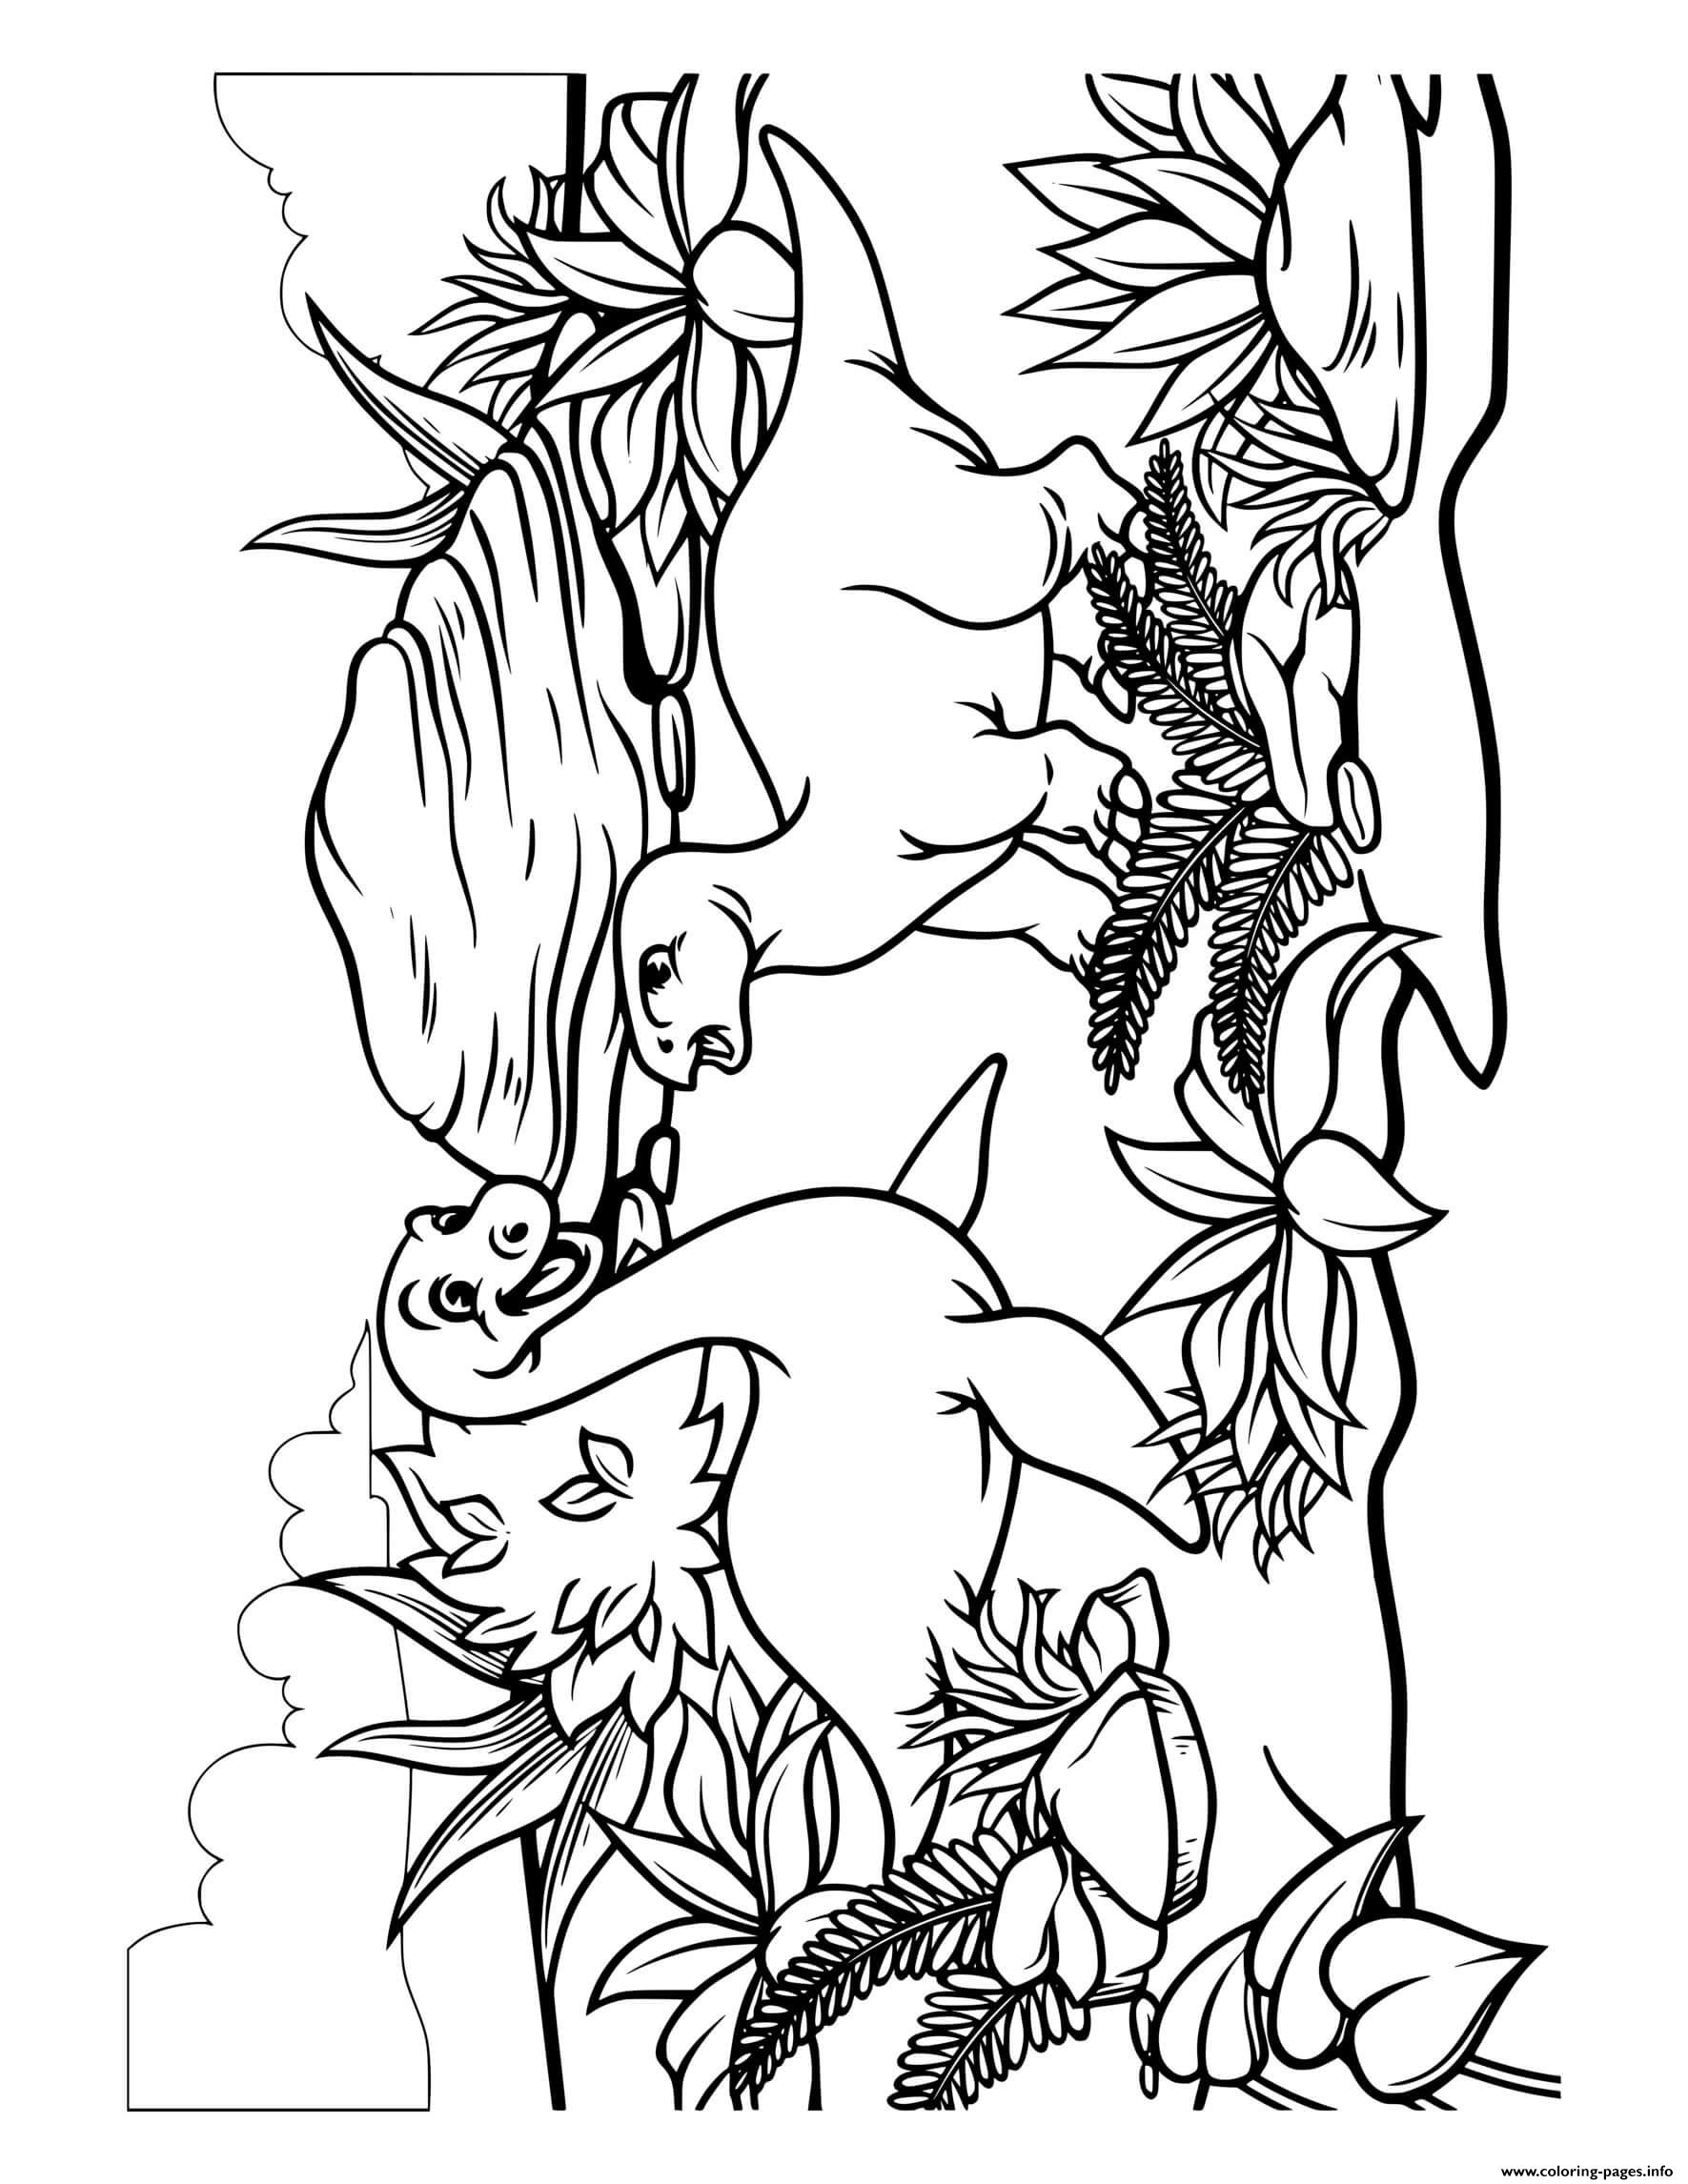 Dinosaur Cute Dinosaur Scene With Ferns 2 Coloring Pages Printable